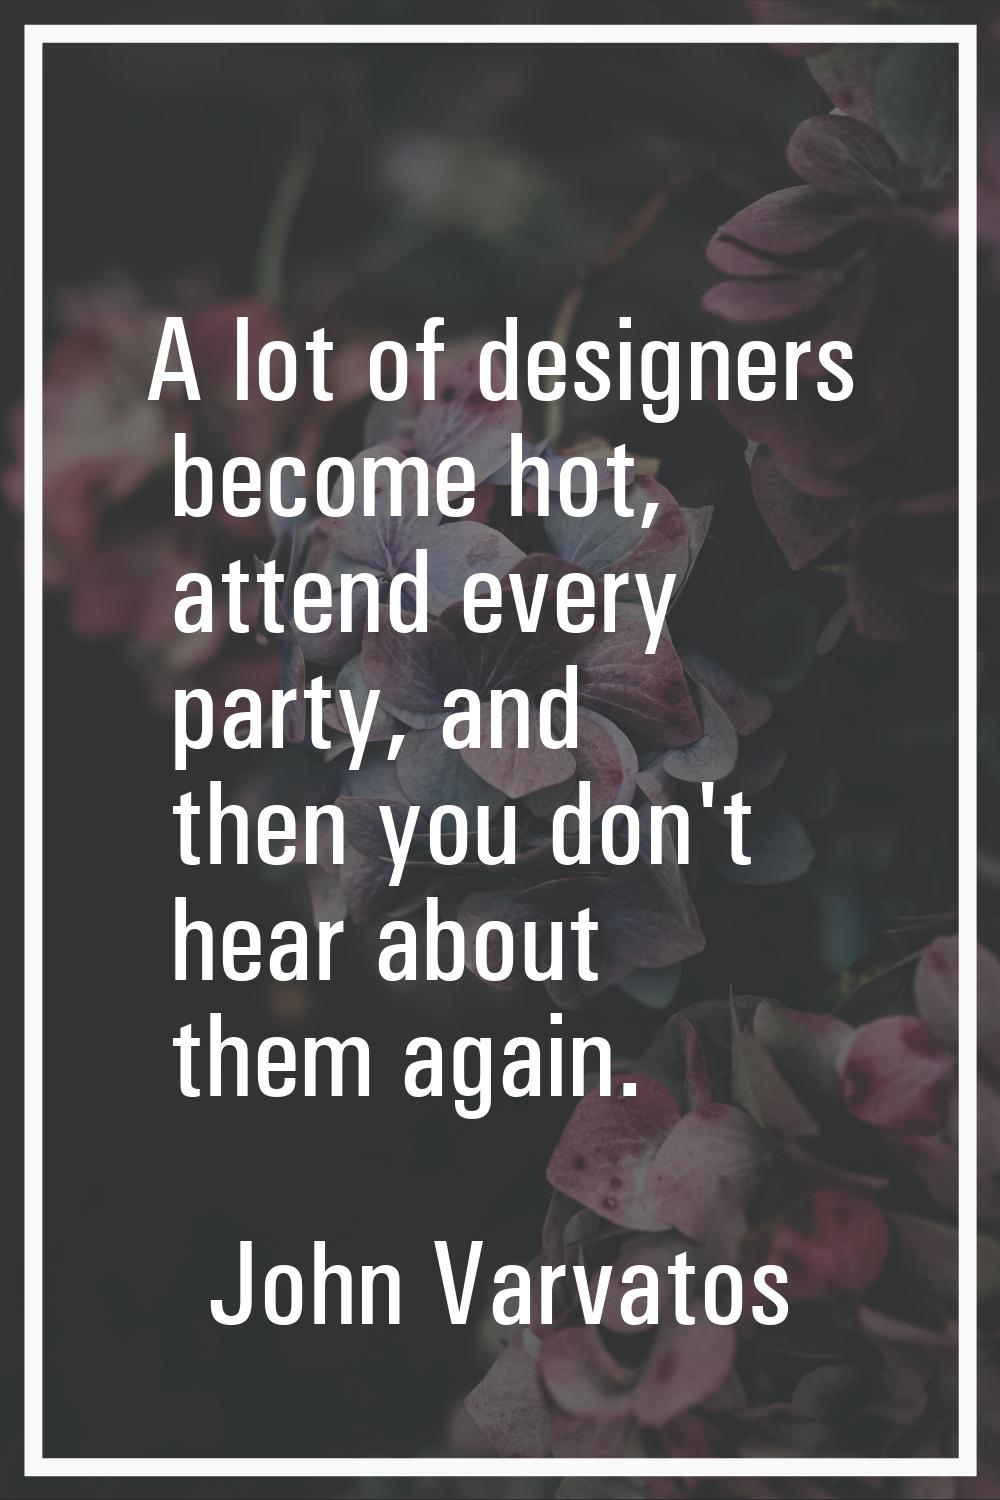 A lot of designers become hot, attend every party, and then you don't hear about them again.